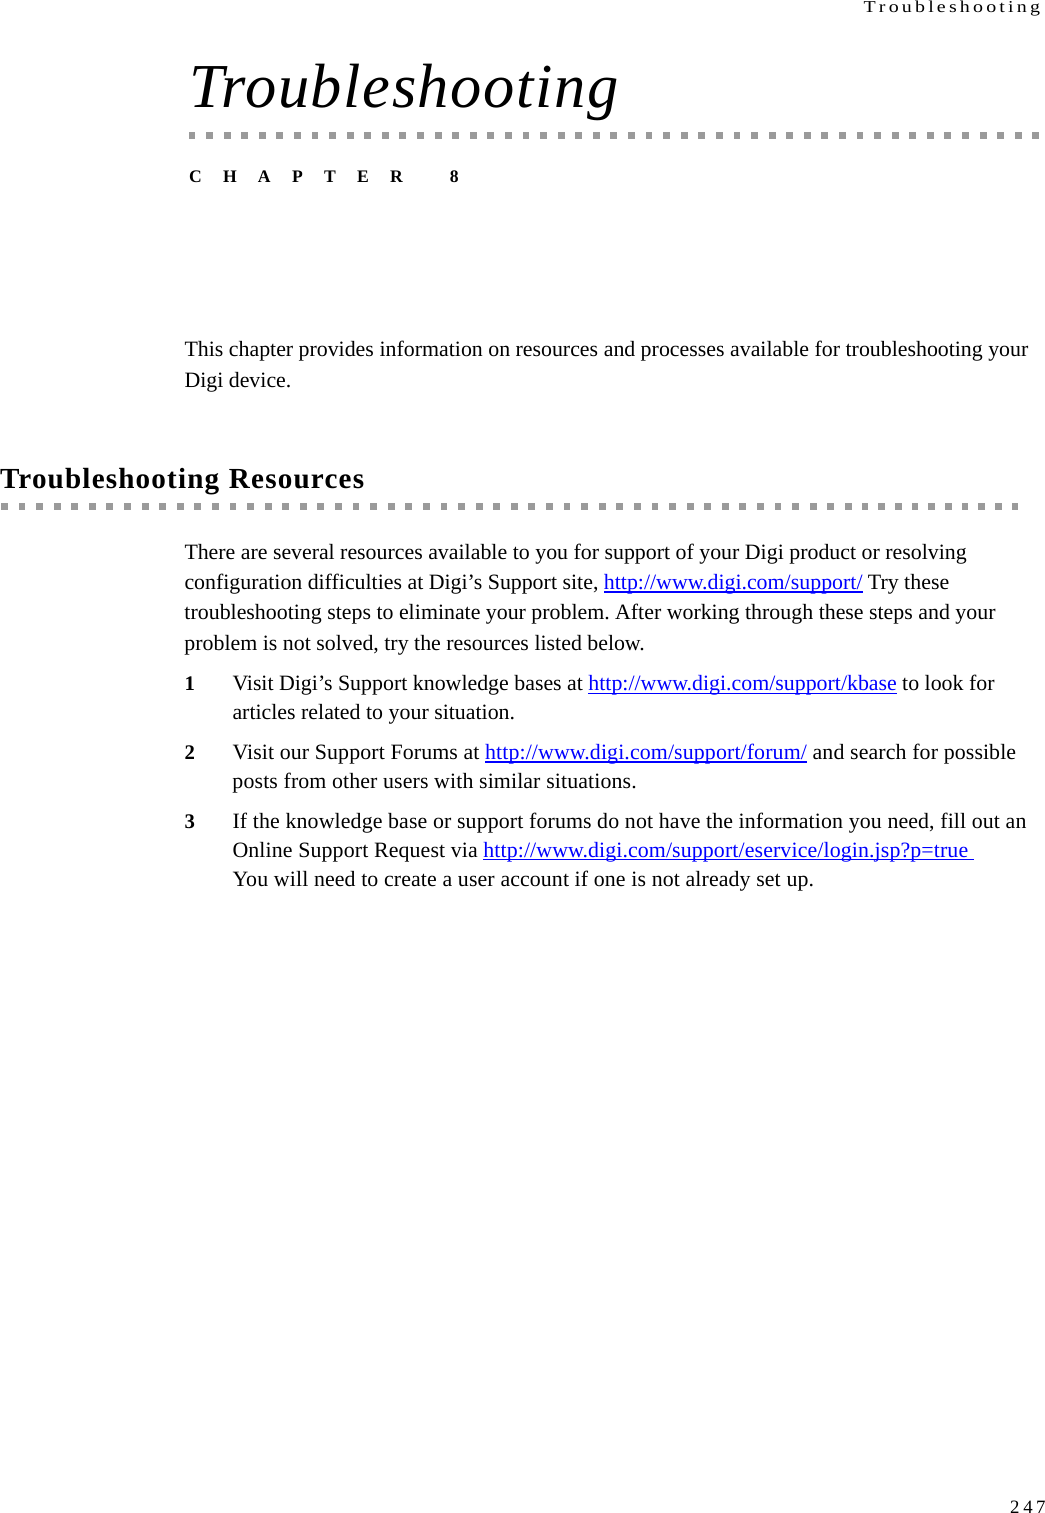 Troubleshooting247TroubleshootingCHAPTER 8This chapter provides information on resources and processes available for troubleshooting your Digi device.Troubleshooting ResourcesThere are several resources available to you for support of your Digi product or resolving configuration difficulties at Digi’s Support site, http://www.digi.com/support/ Try these troubleshooting steps to eliminate your problem. After working through these steps and your problem is not solved, try the resources listed below.1Visit Digi’s Support knowledge bases at http://www.digi.com/support/kbase to look for articles related to your situation. 2Visit our Support Forums at http://www.digi.com/support/forum/ and search for possible posts from other users with similar situations. 3If the knowledge base or support forums do not have the information you need, fill out an Online Support Request via http://www.digi.com/support/eservice/login.jsp?p=true You will need to create a user account if one is not already set up.